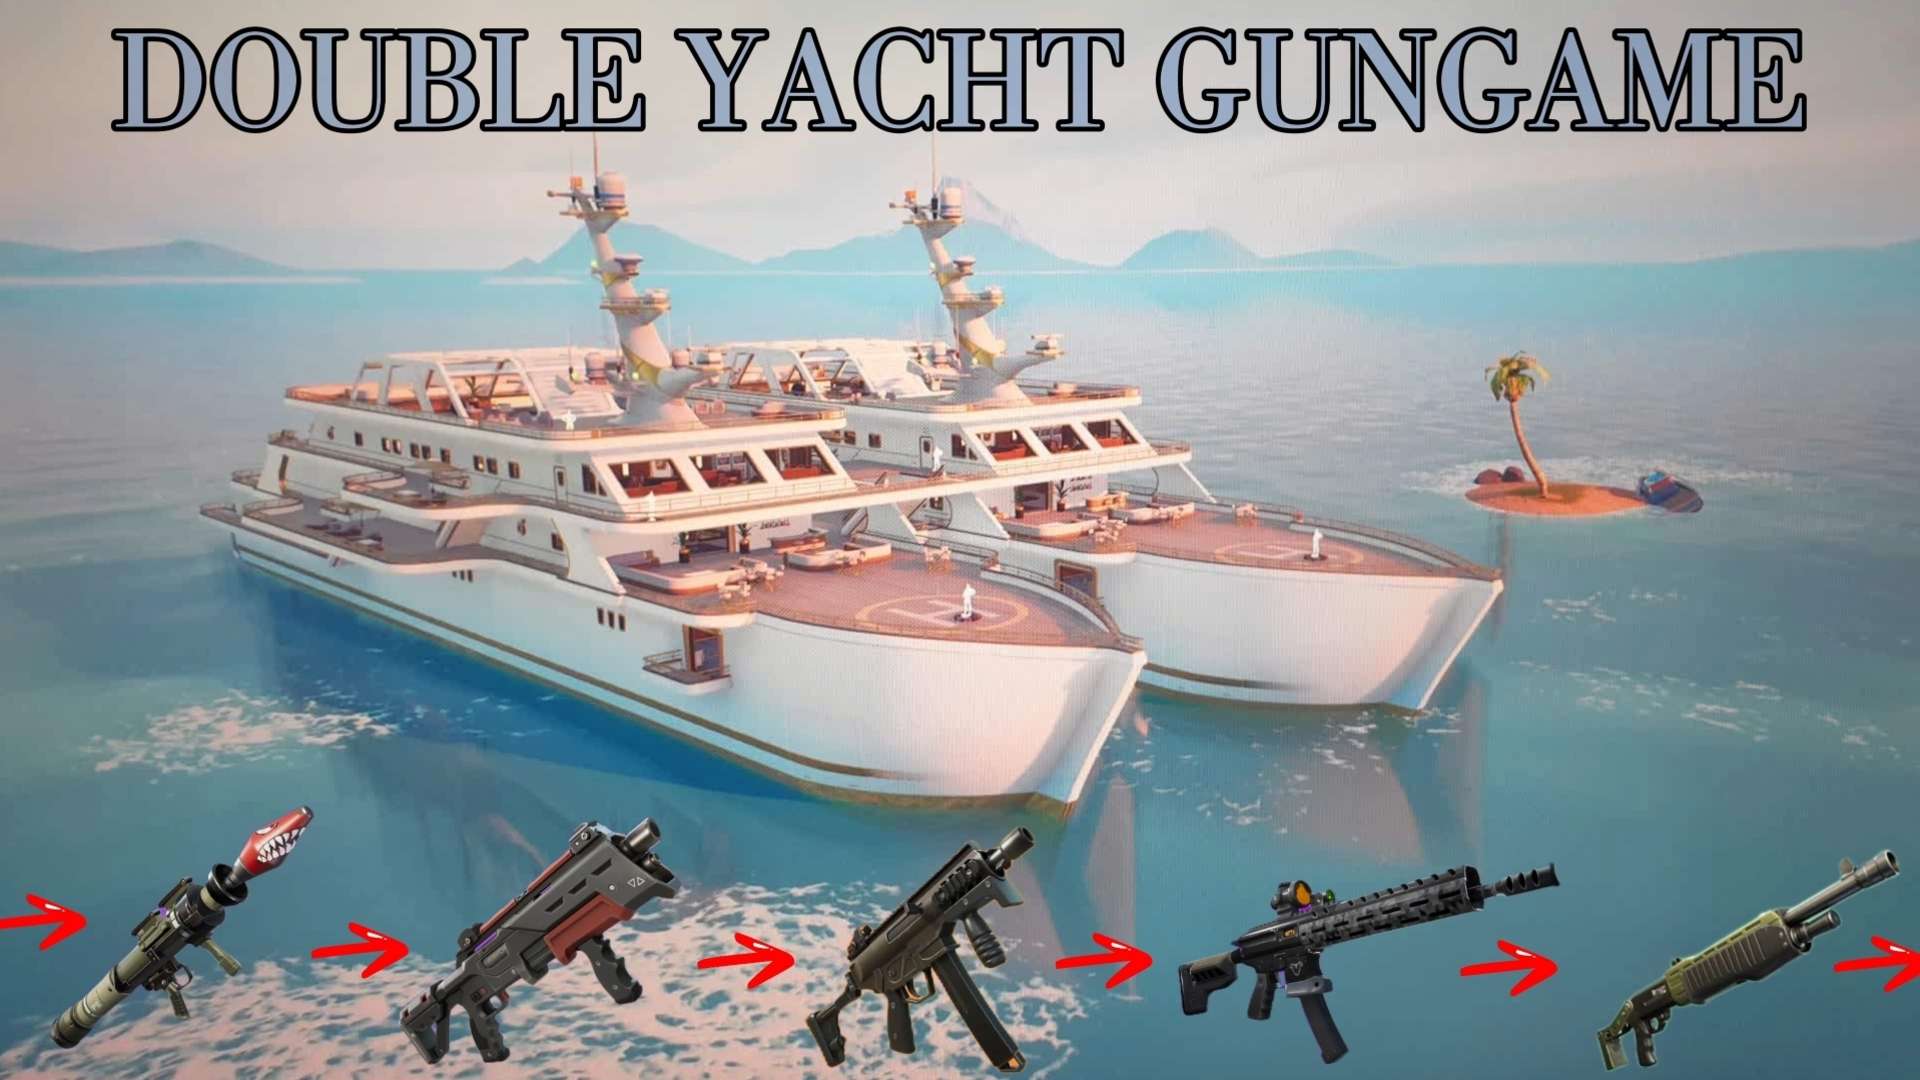 Double Yacht Gungame 1554-9836-9282